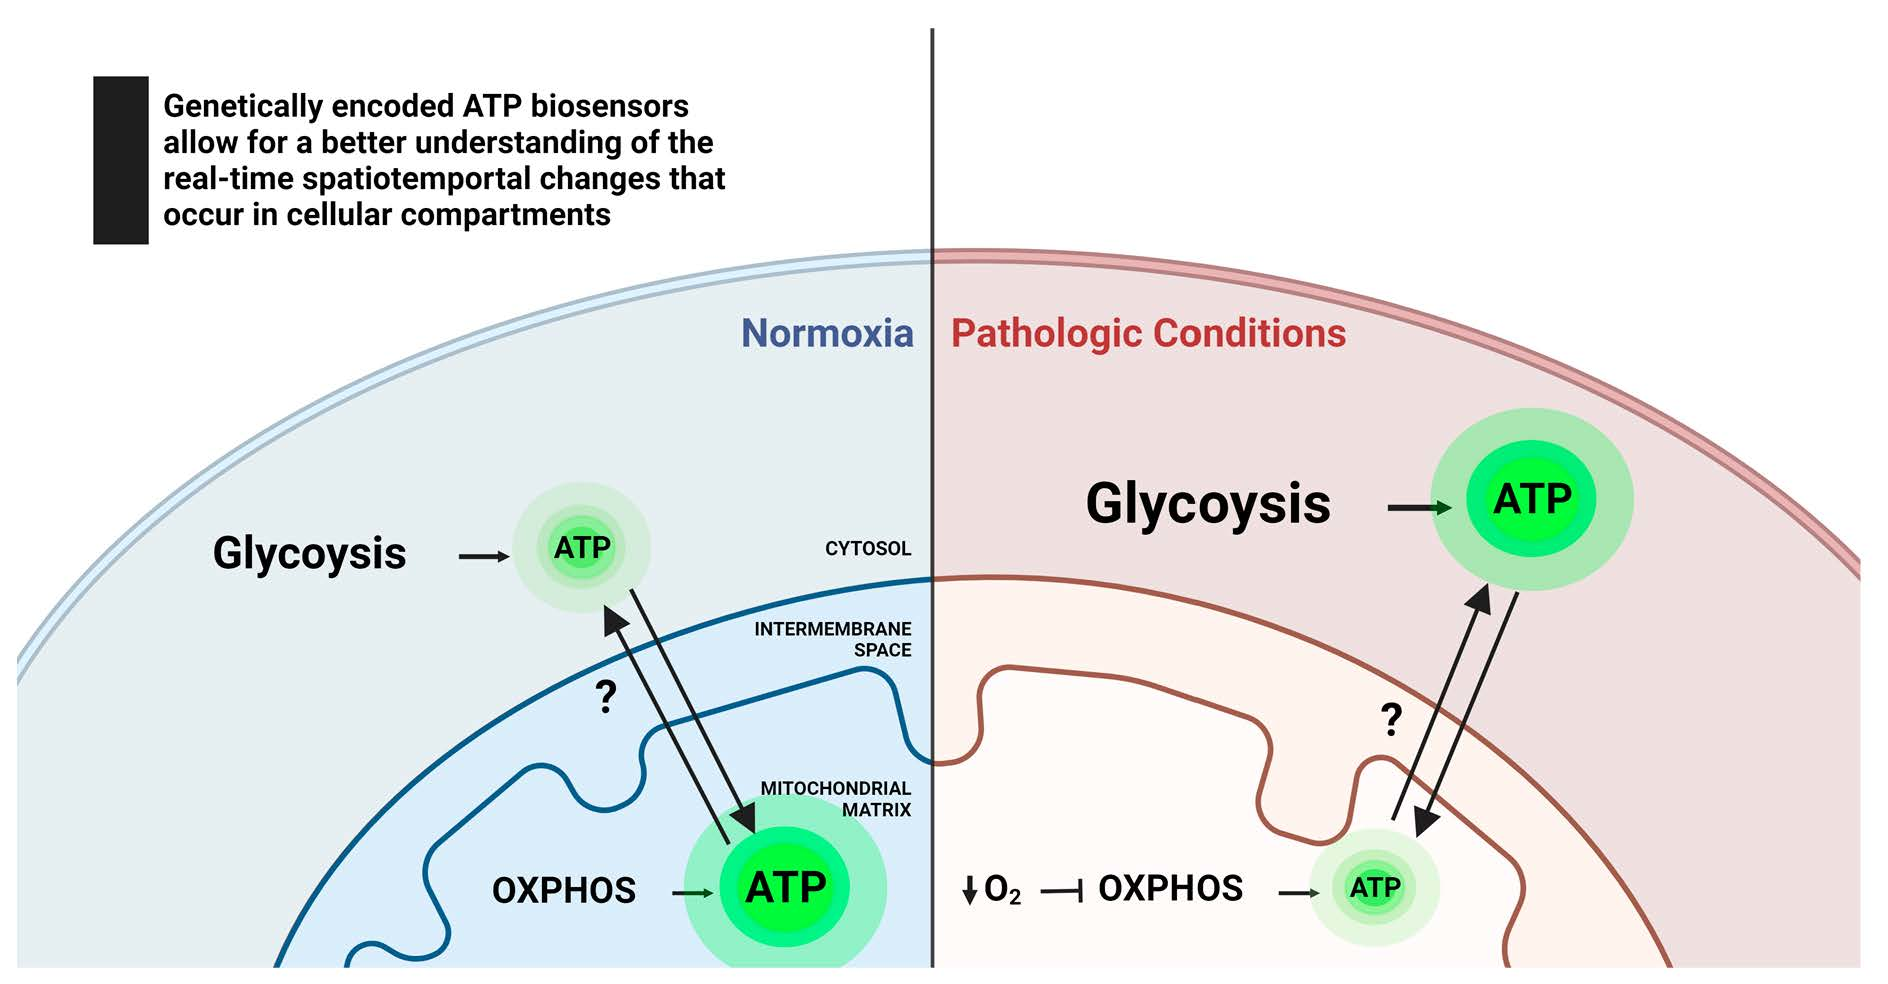 Free of Direct Dynamics ATP ATP Genetically Cellular Cells Monitoring Encoded Full-Text | | for Biosensors